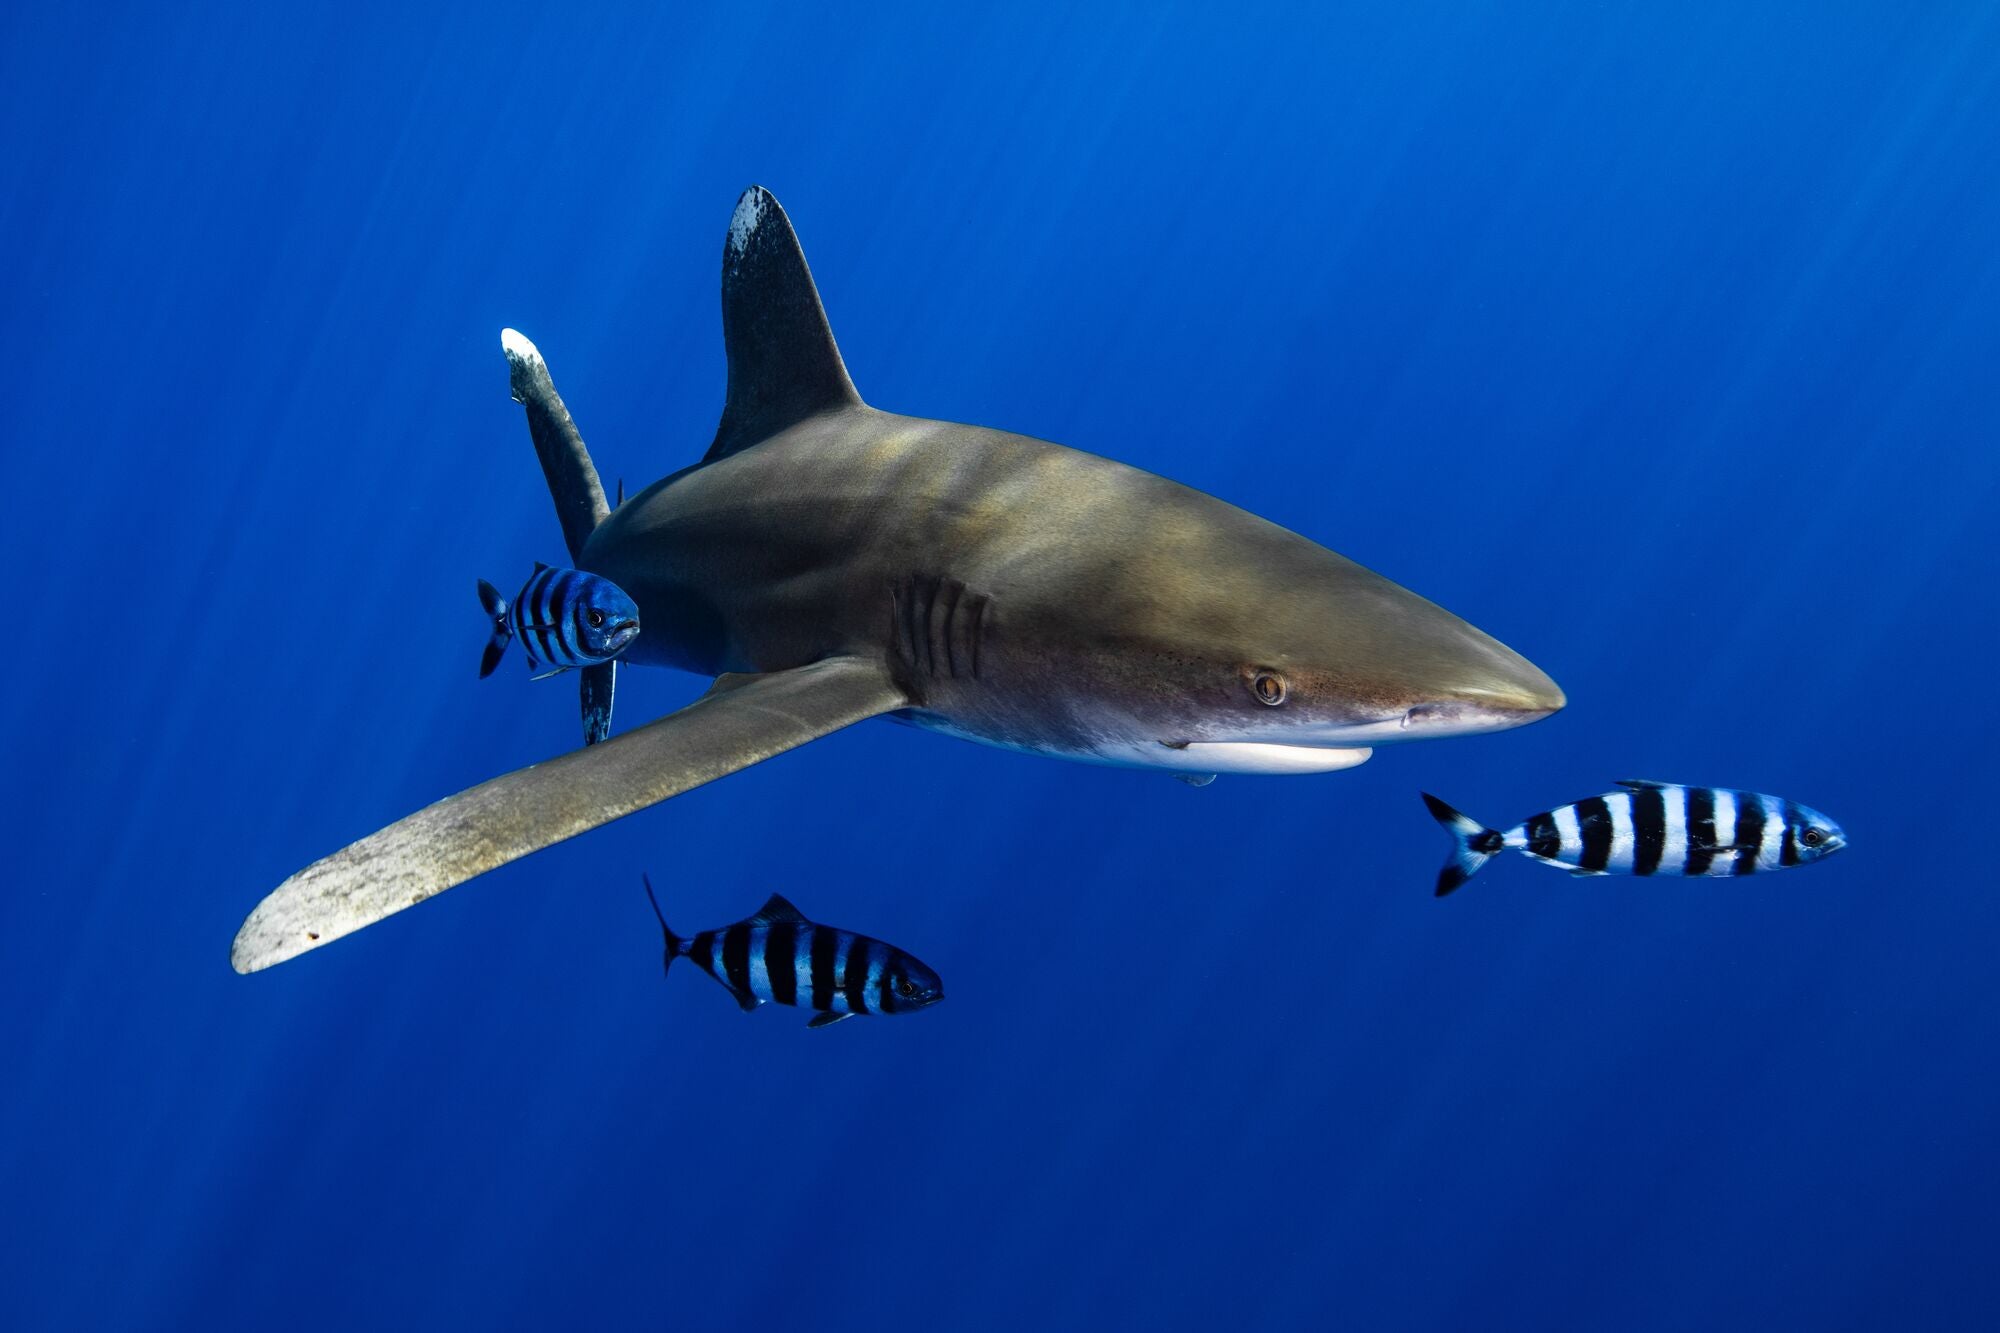 The oceanic whitetip shark’s population has crashed by 80-95% since the 1990s.